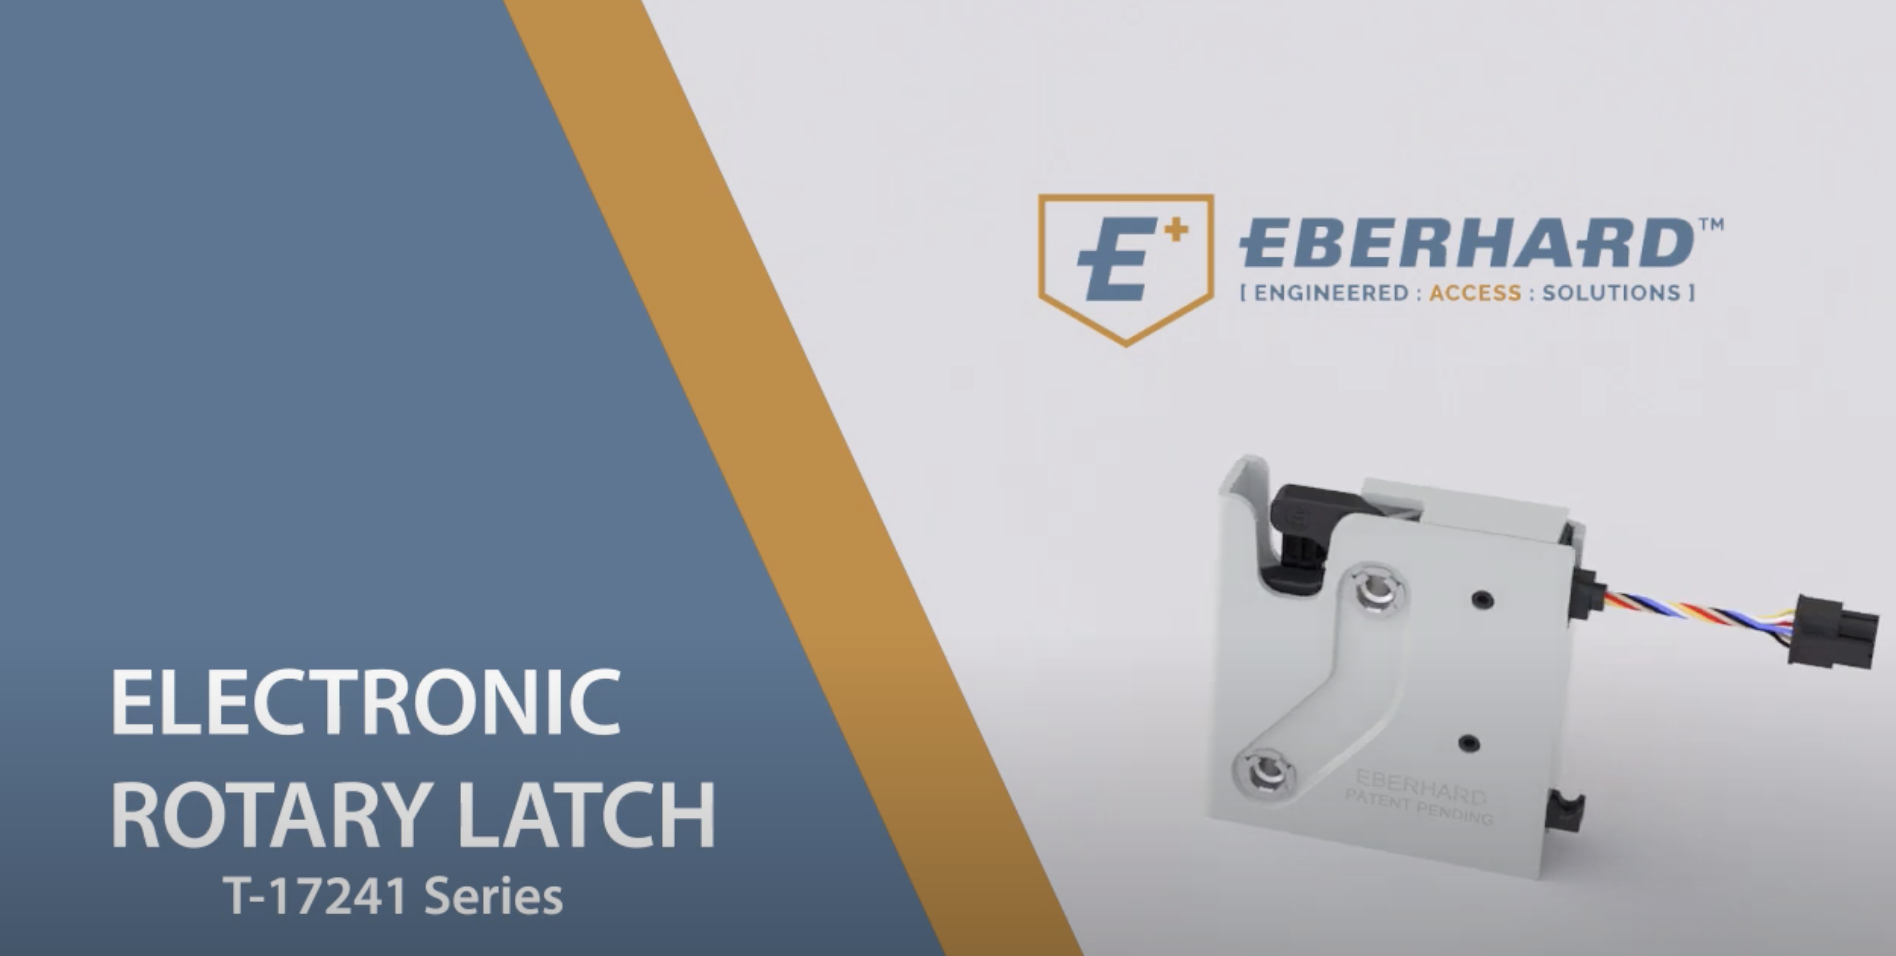 *NEW* Electric Rotary Latch Explained [VIDEO]